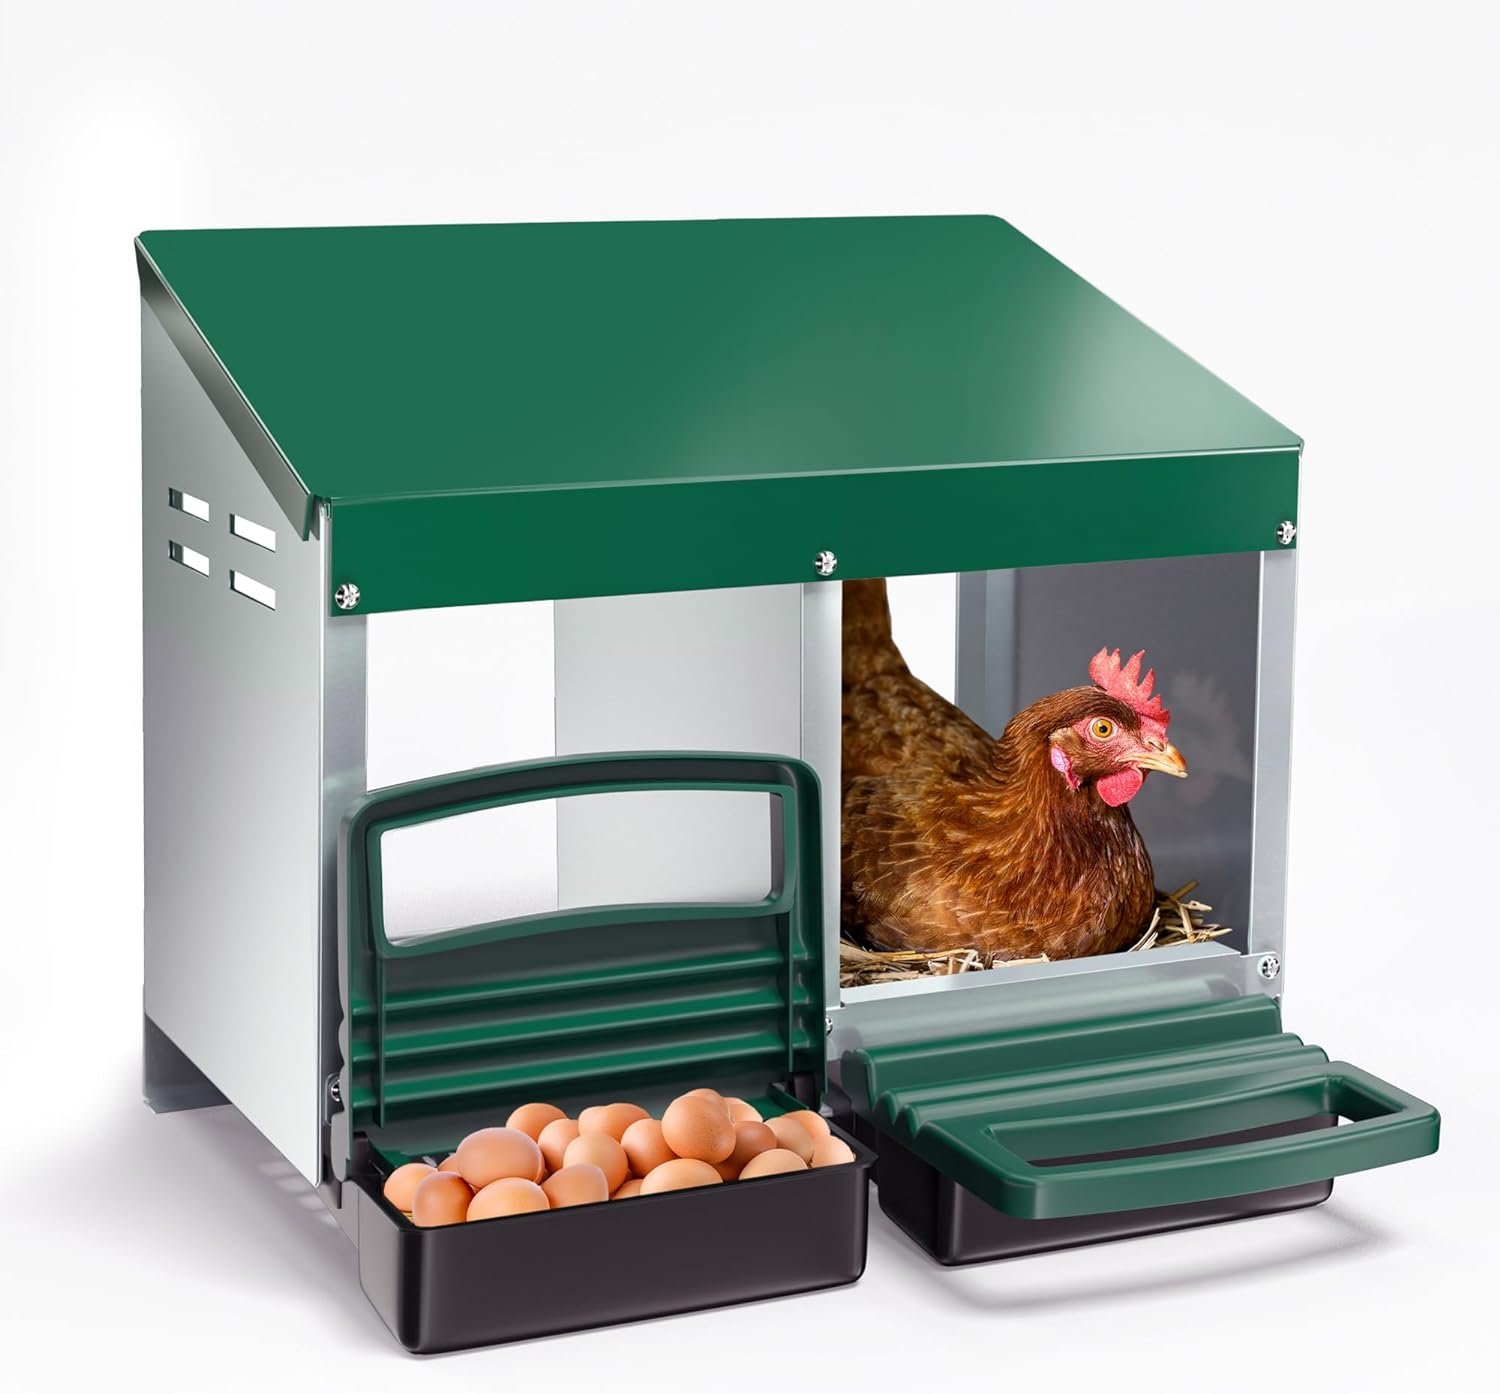 TOETOL Chicken Nesting Boxes - 2 Hole Metal Chicken Egg Laying Heavy Duty Nest Box for Chicken and Poultry with Lid Cover to Protect Eggs